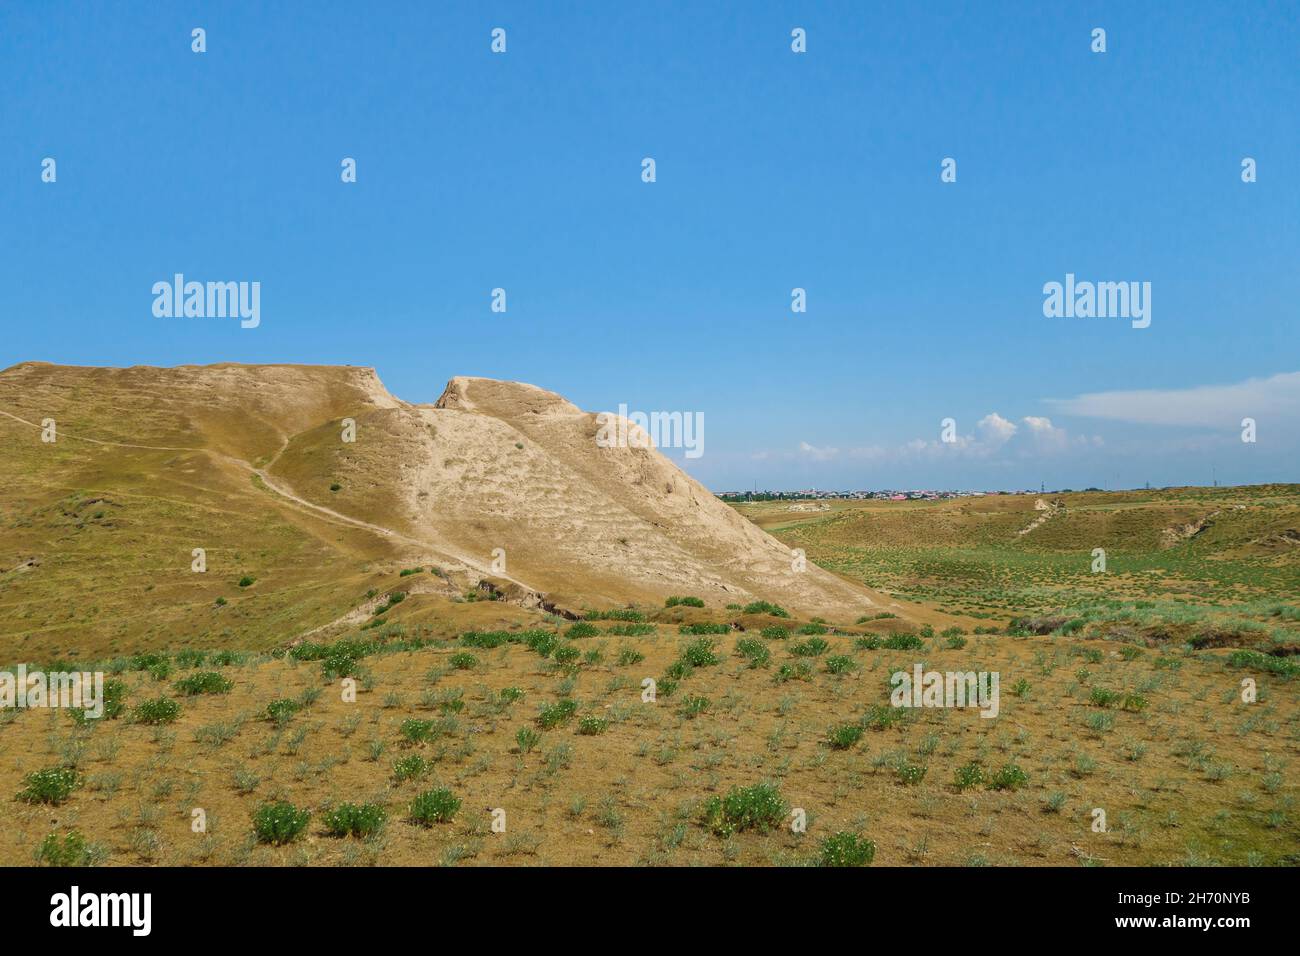 Panorama of Afrasiyab, most ancient place in Samarkand, Uzbekistan. What appears to be hill on left is former fortress and palace, founded in VII BC. Stock Photo